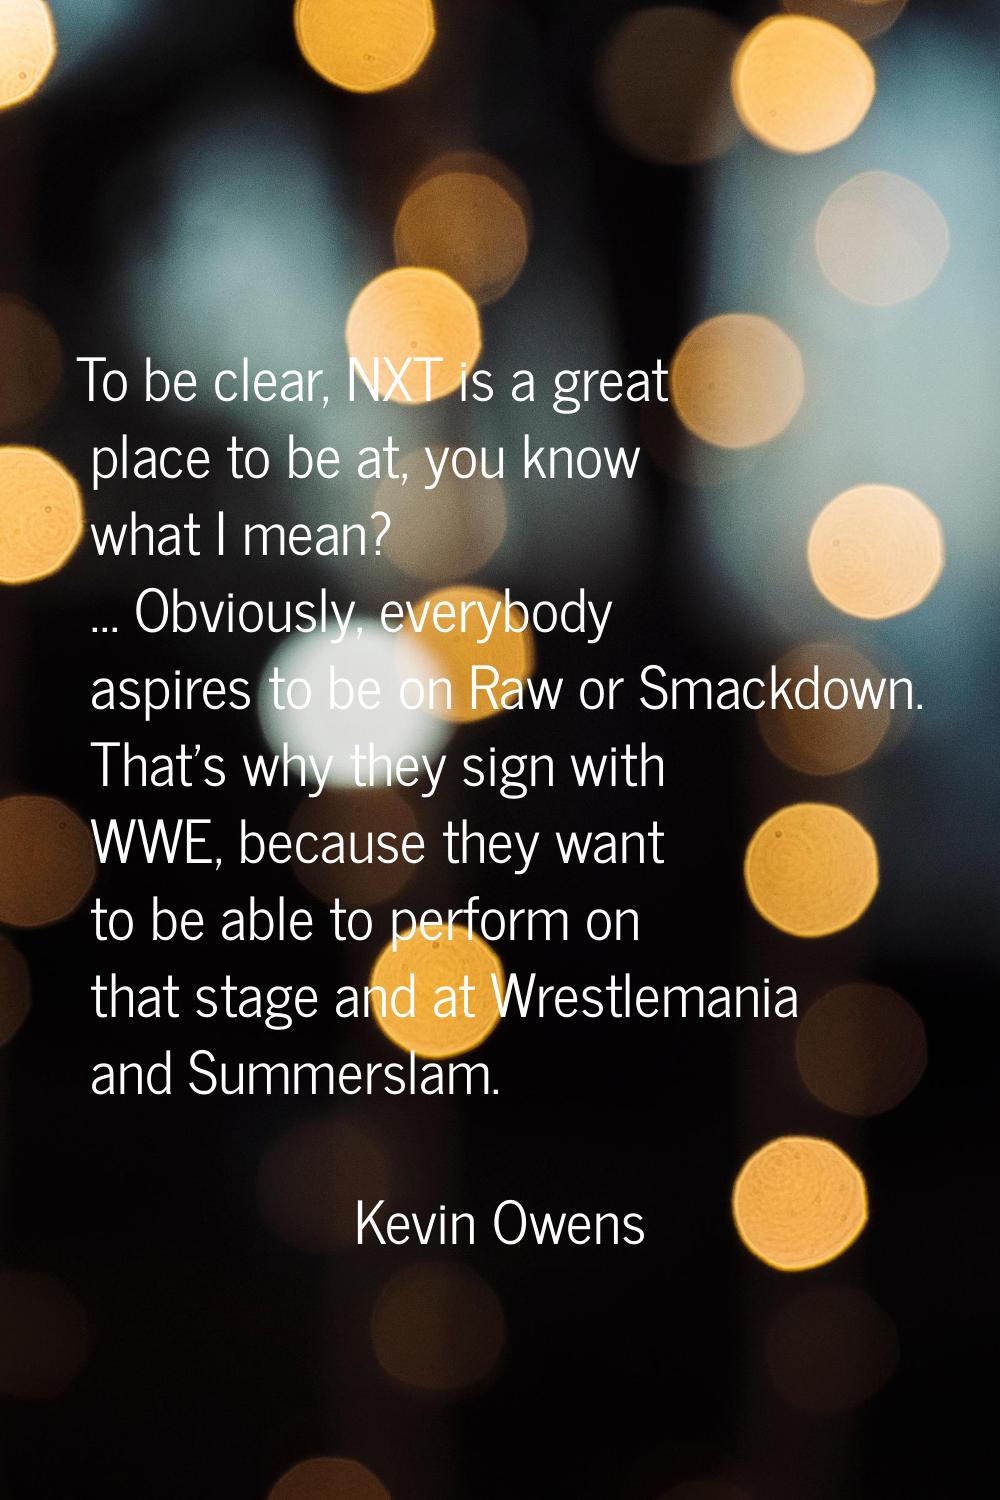 To be clear, NXT is a great place to be at, you know what I mean? ... Obviously, everybody aspires 